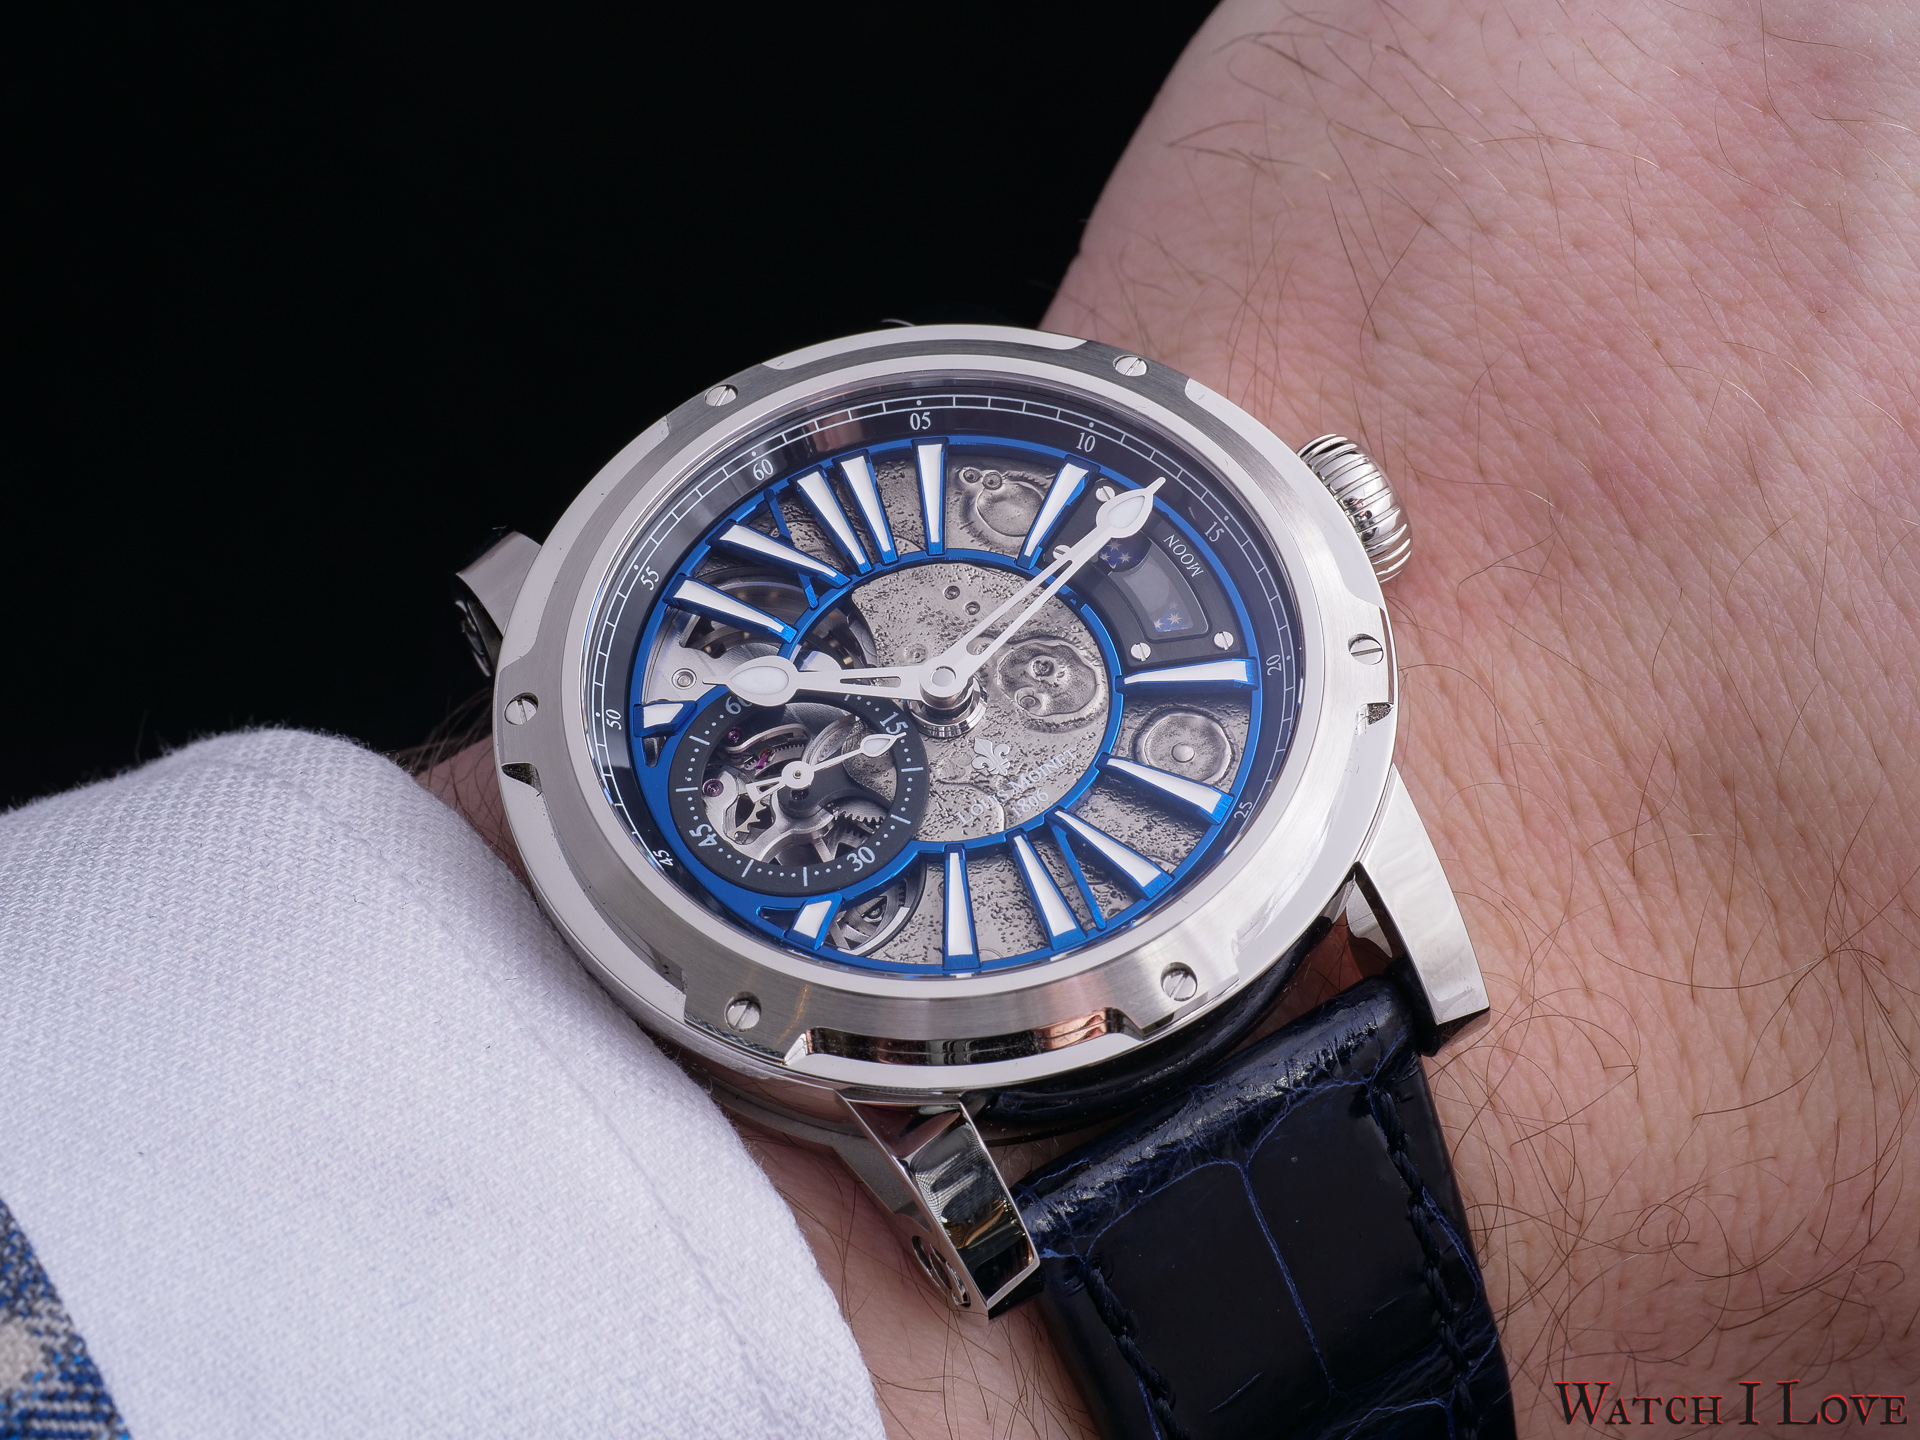 Hands-On - Louis Moinet Super Moon and Mars Mission Limited Editions